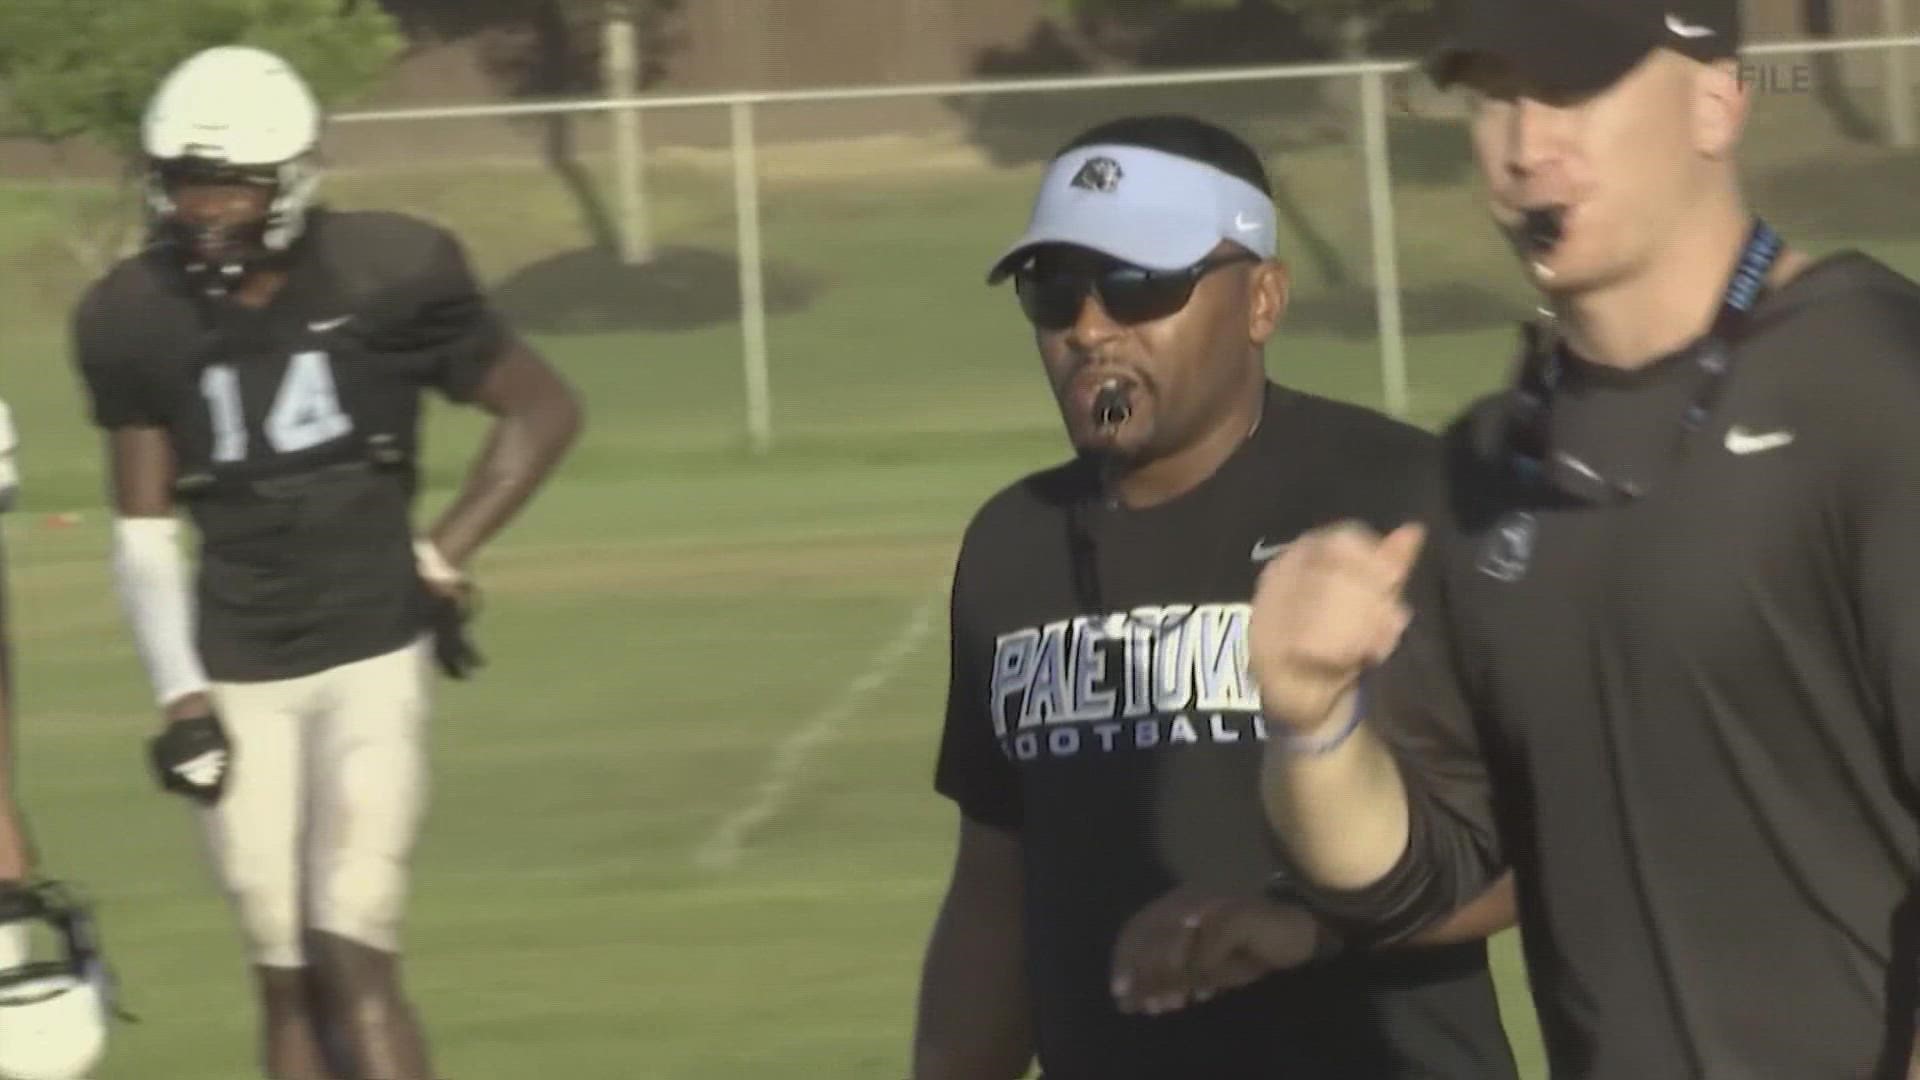 The head football coach at Paetow High School has resigned as he faces a possible investigation into his conduct at the school.